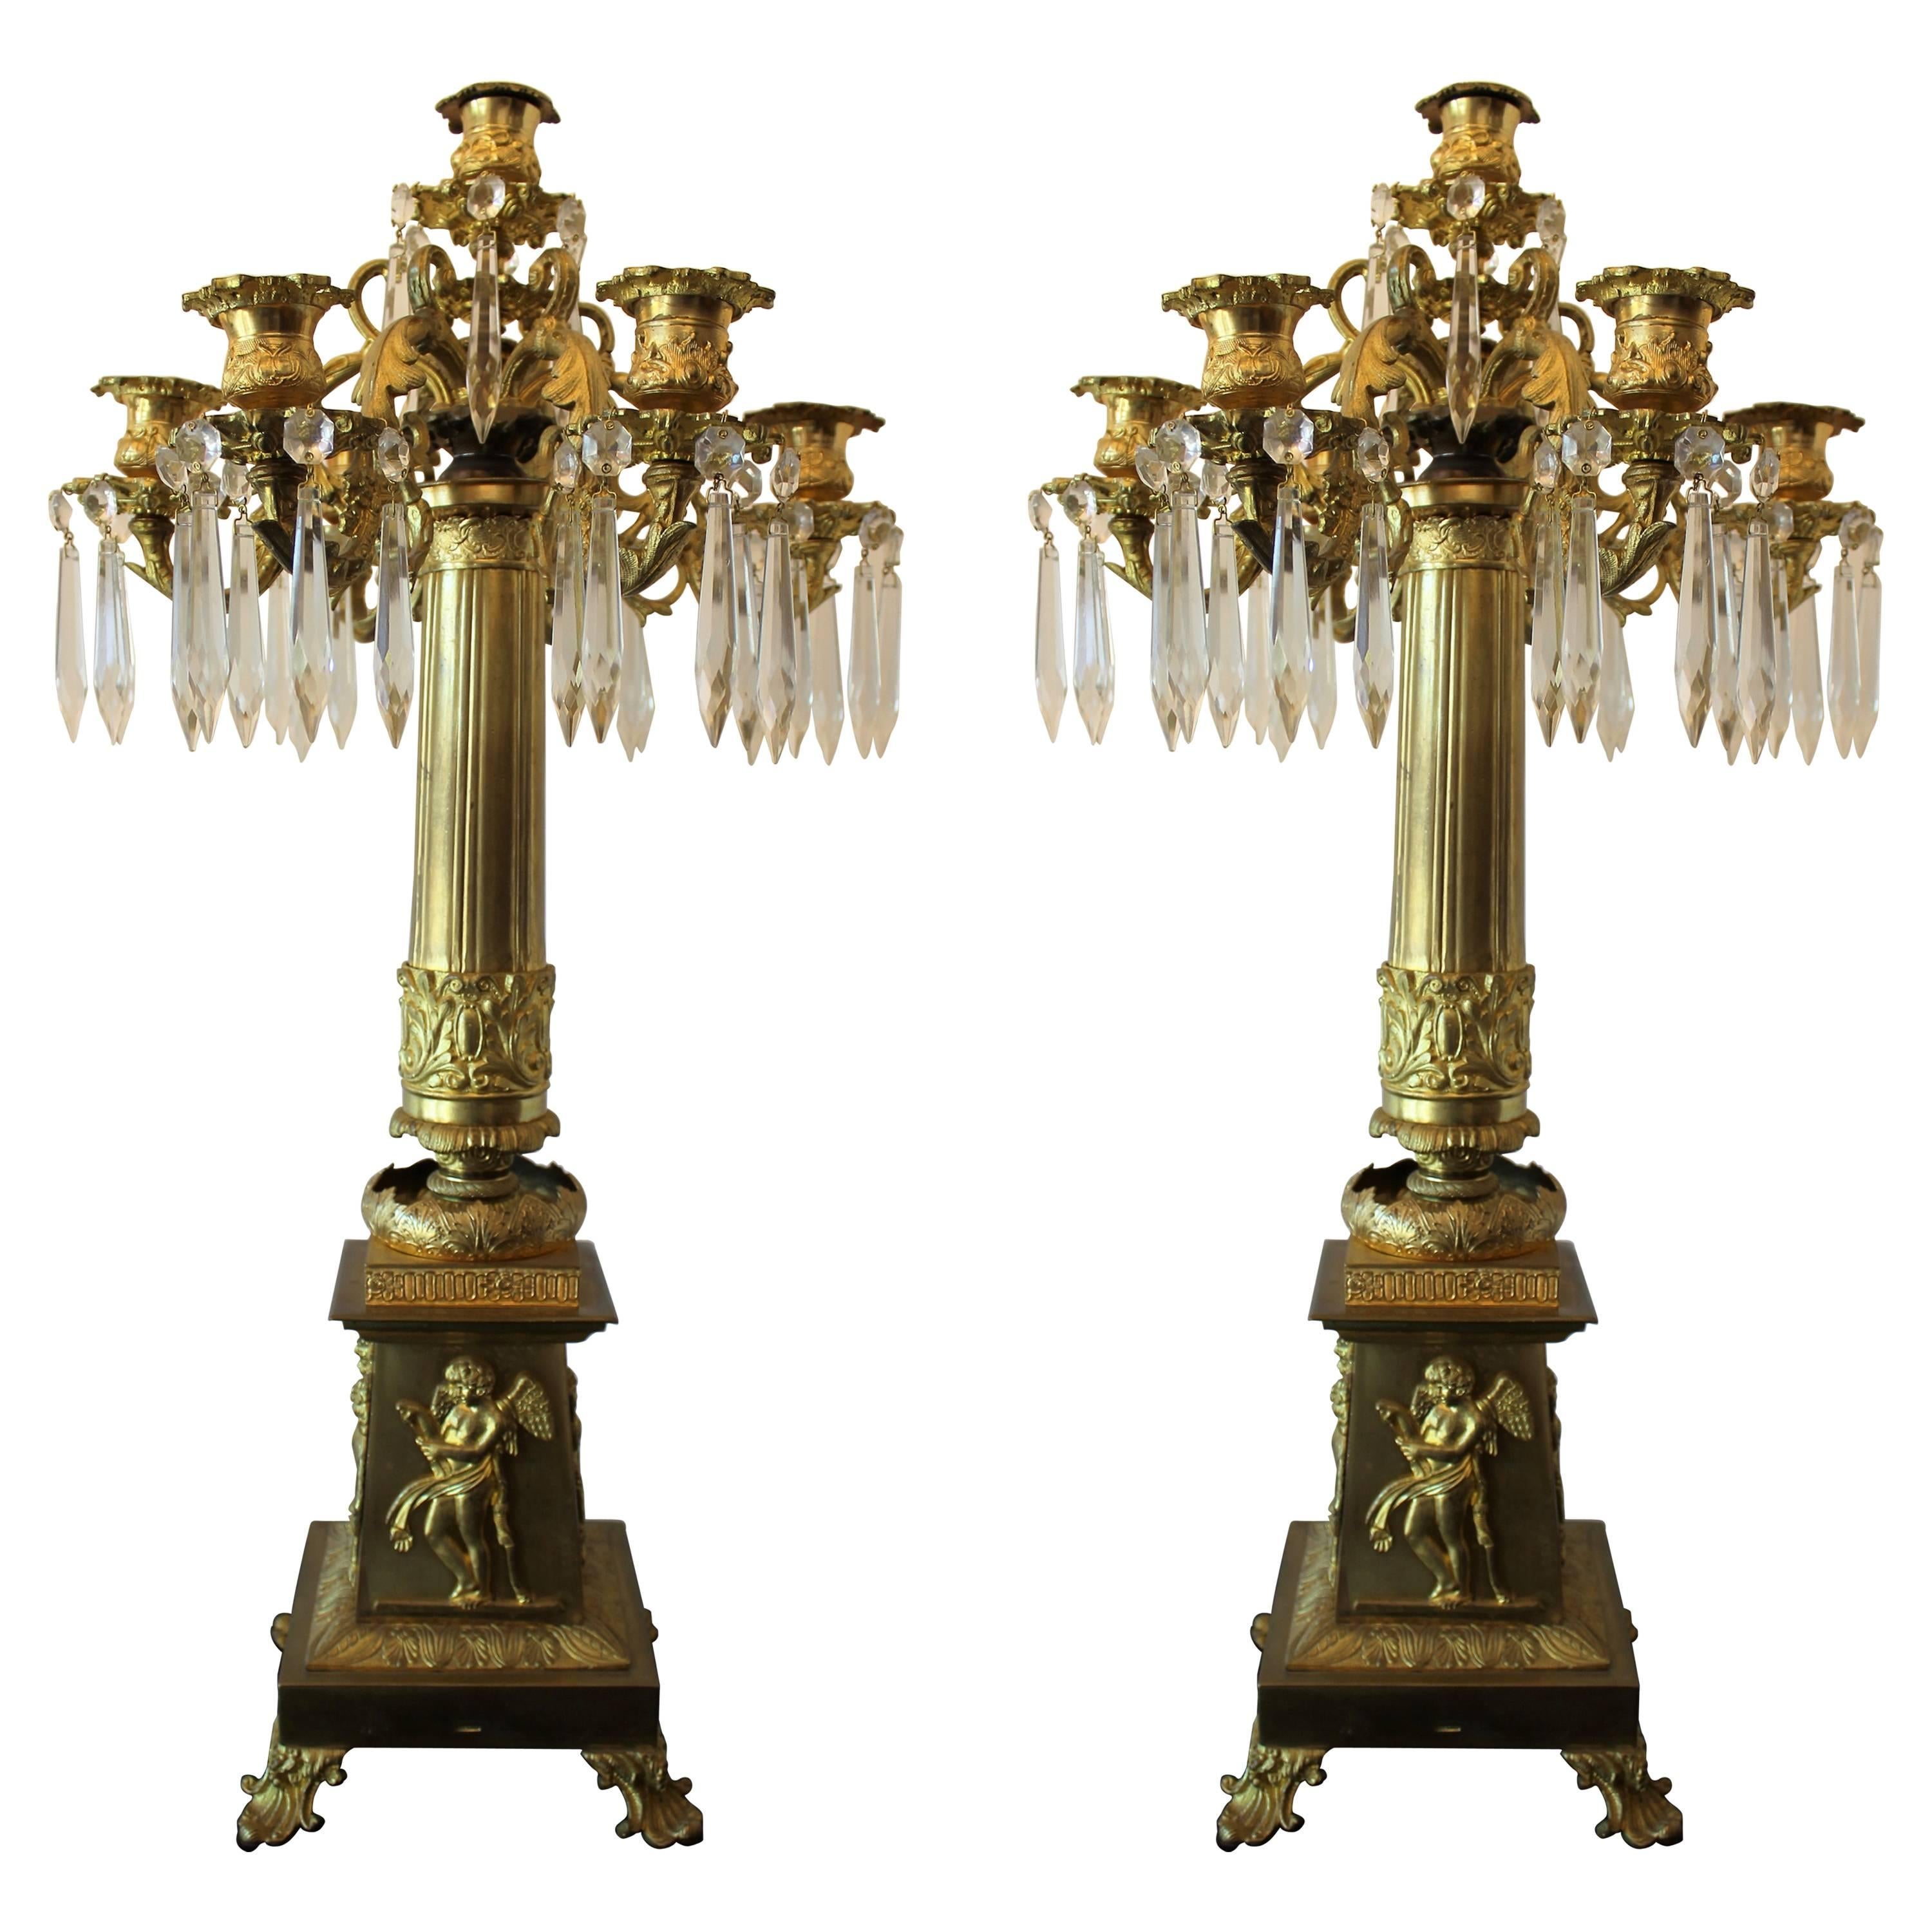 Pair of Russian Ormolu Patinated Bronze and Crystal Candelabras by P. Chizhov For Sale